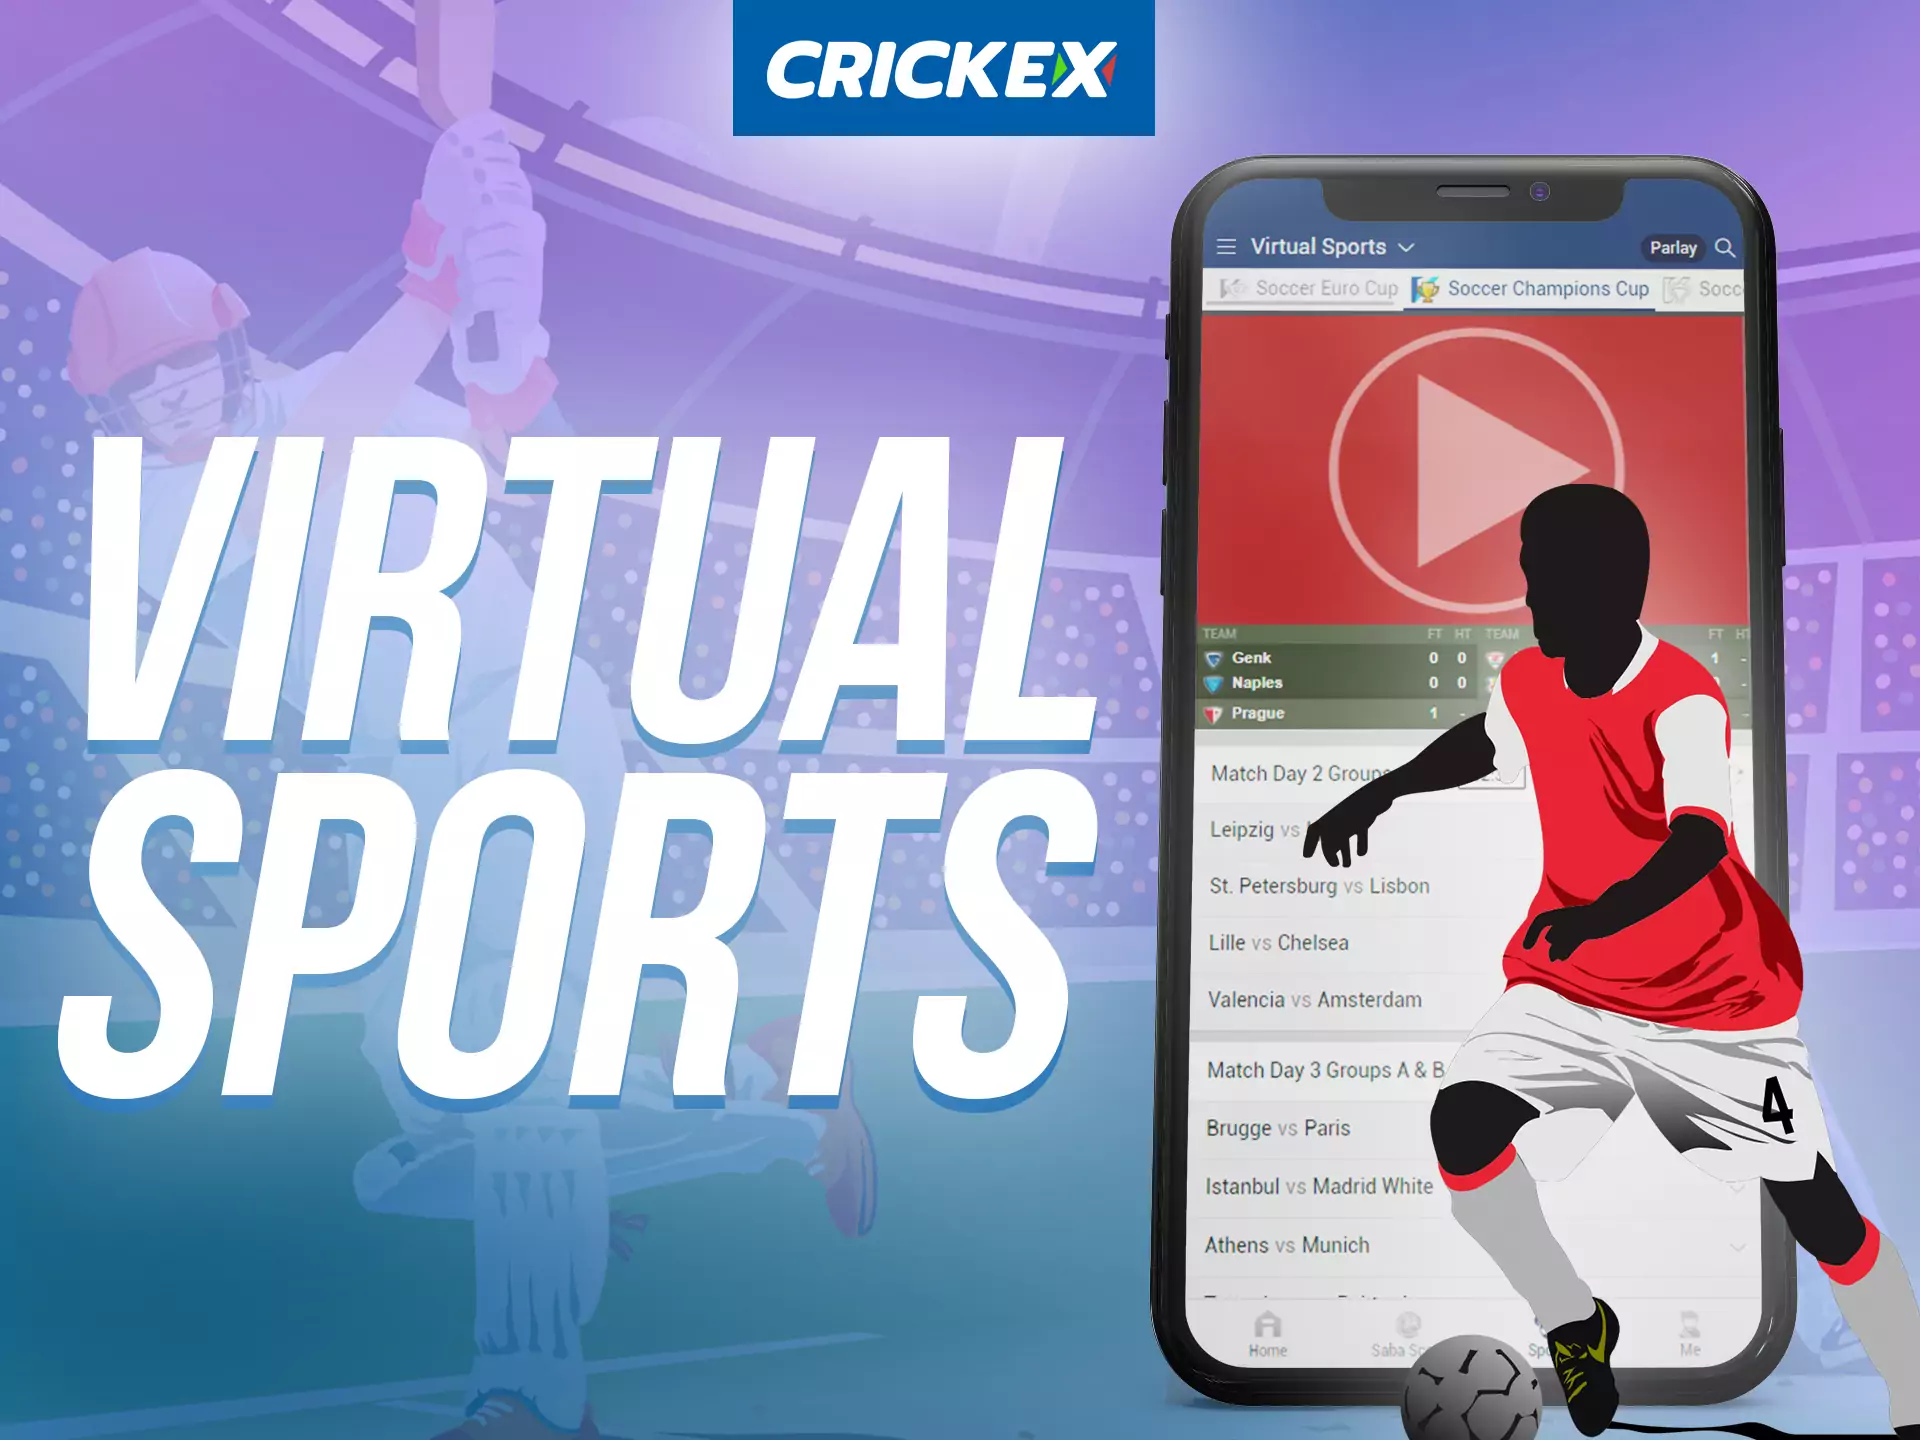 With the Crickex app, bet on viral sports.